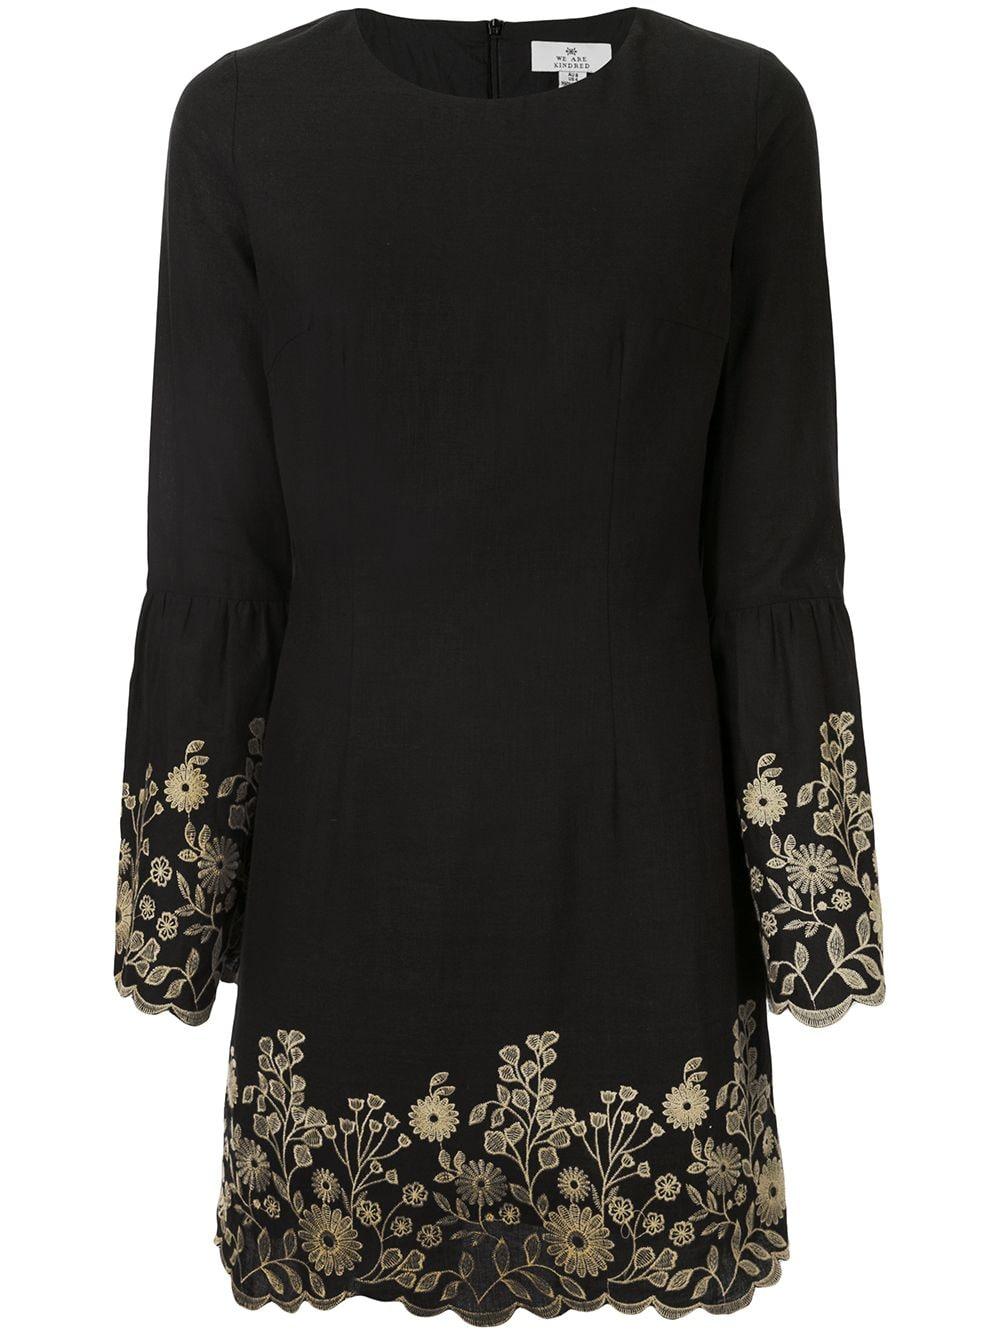 We Are Kindred Linen Bonnie Floral-embroidered Shift Dress in Black - Lyst